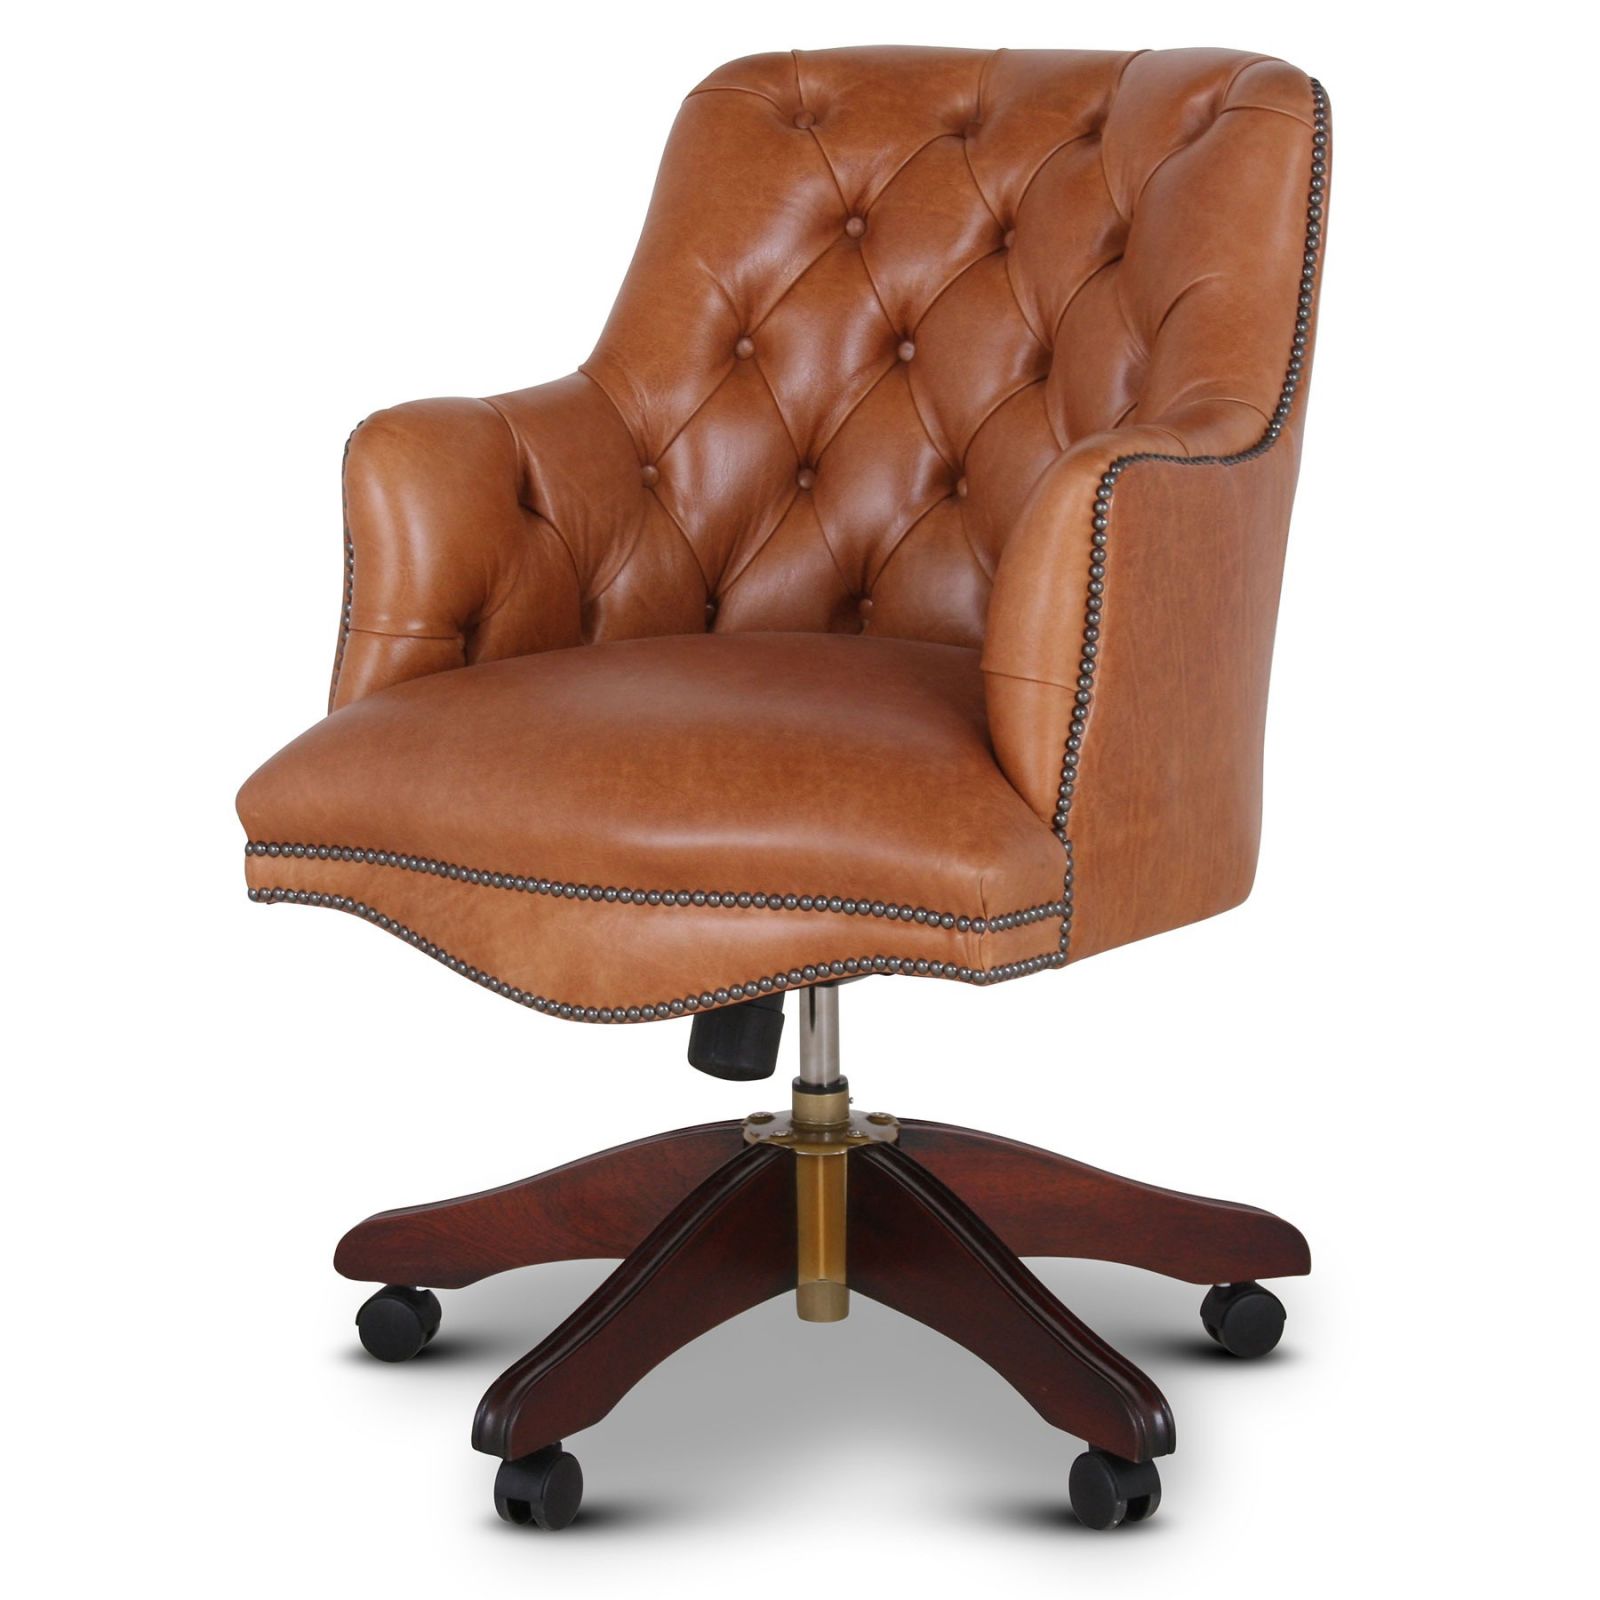 Buttoned Bosuns swivel chair in Tan leather, Desk Chairs